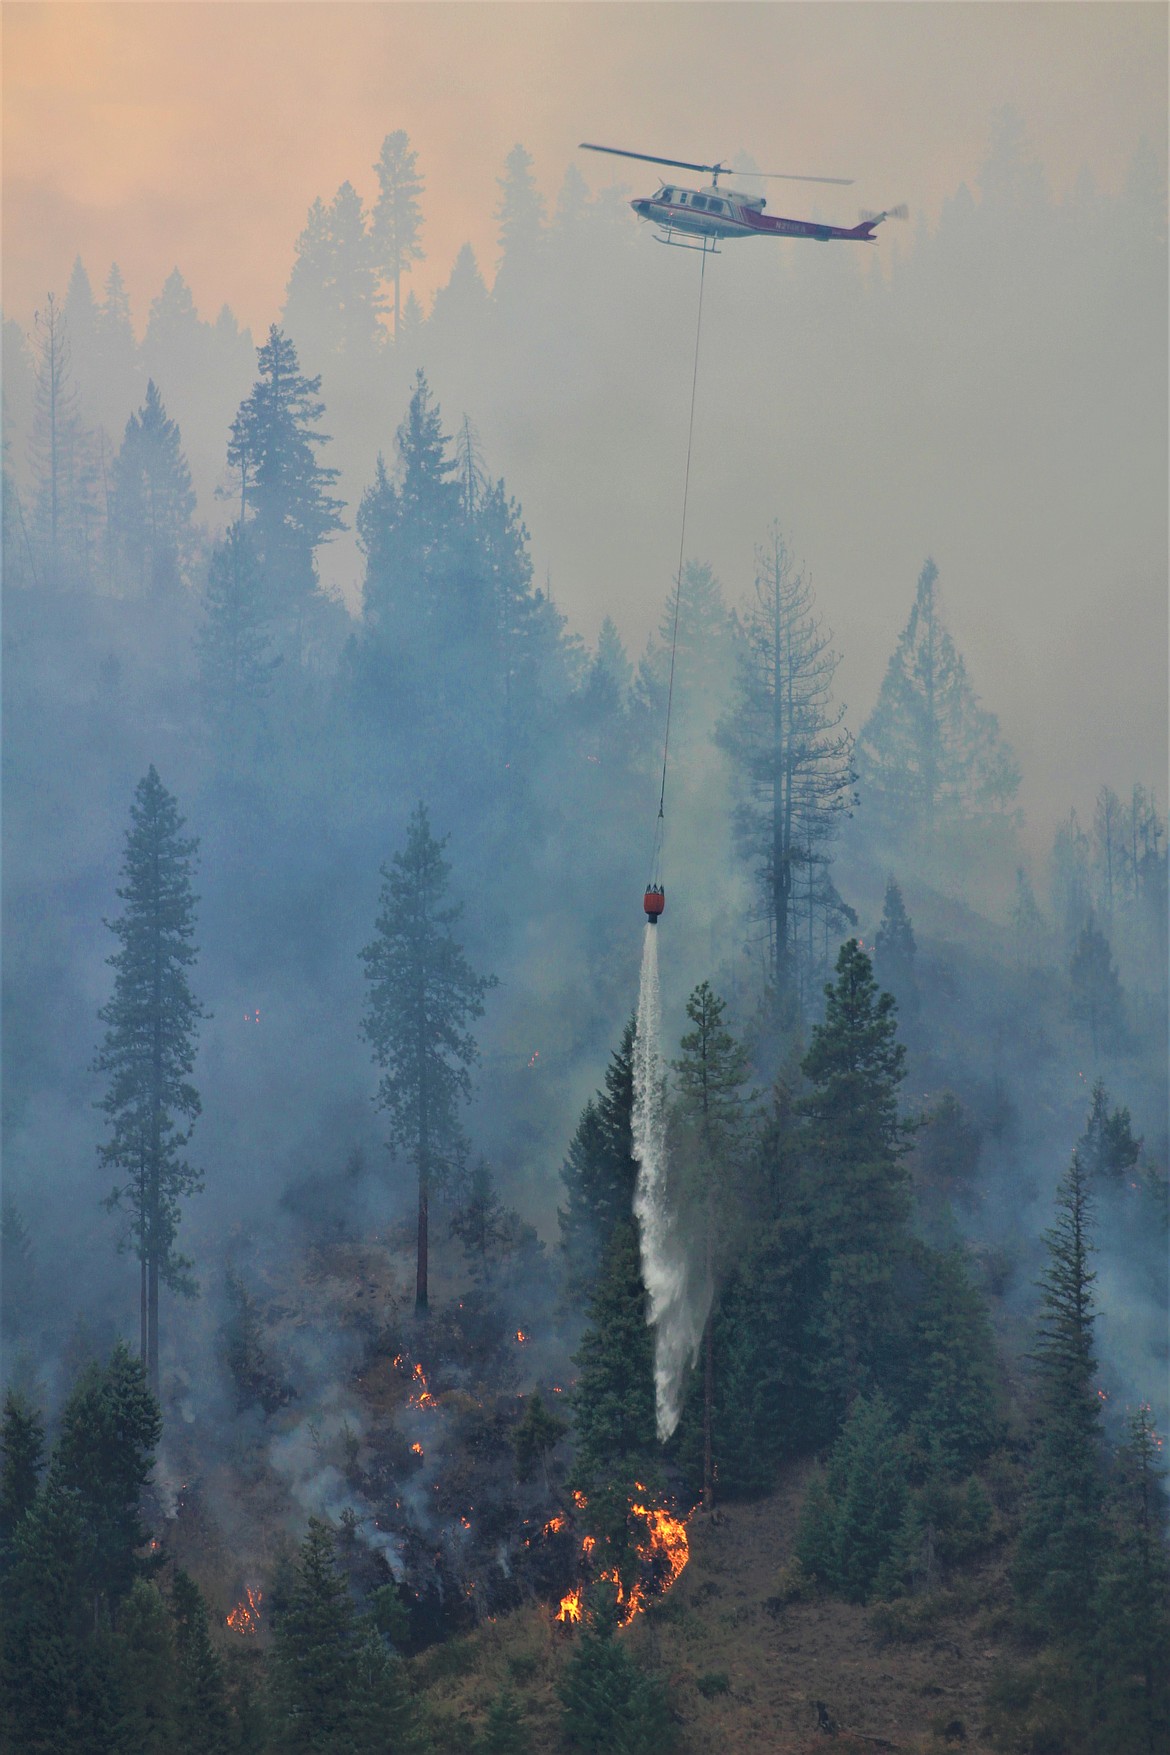 Another direct attack on the CCC Wildfire with air assets.